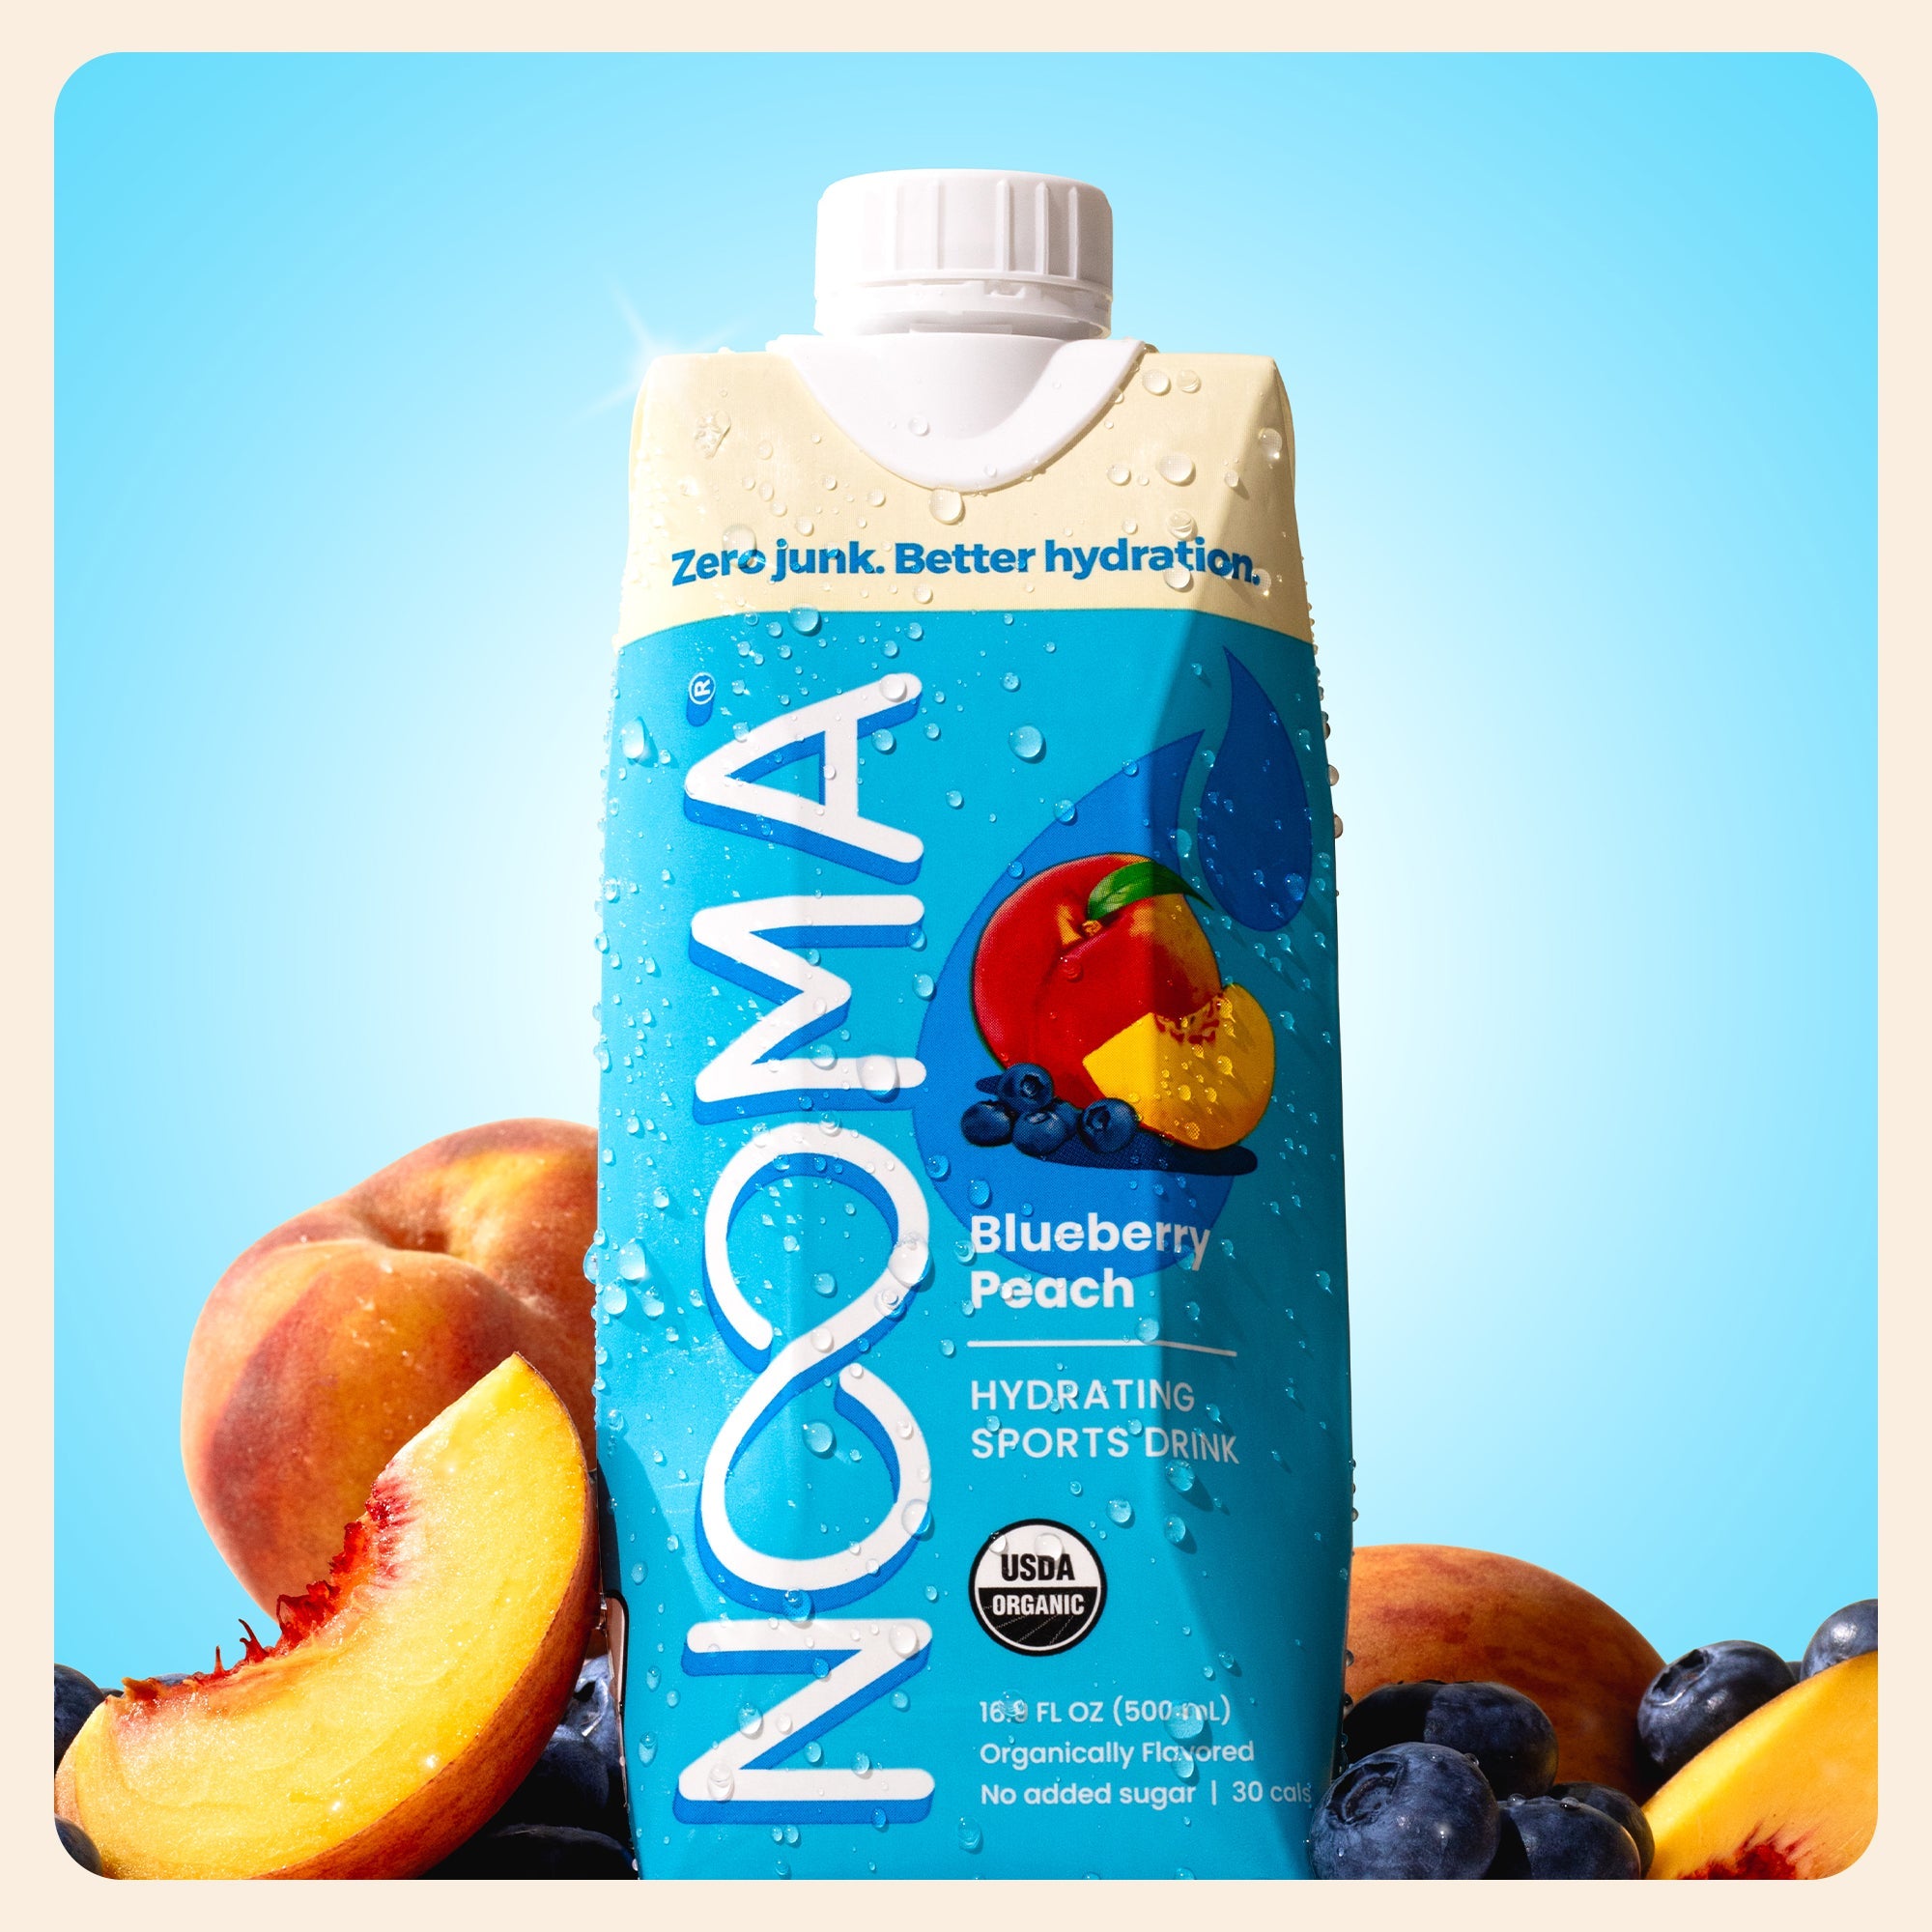 Nooma Hydration Blueberry Peach